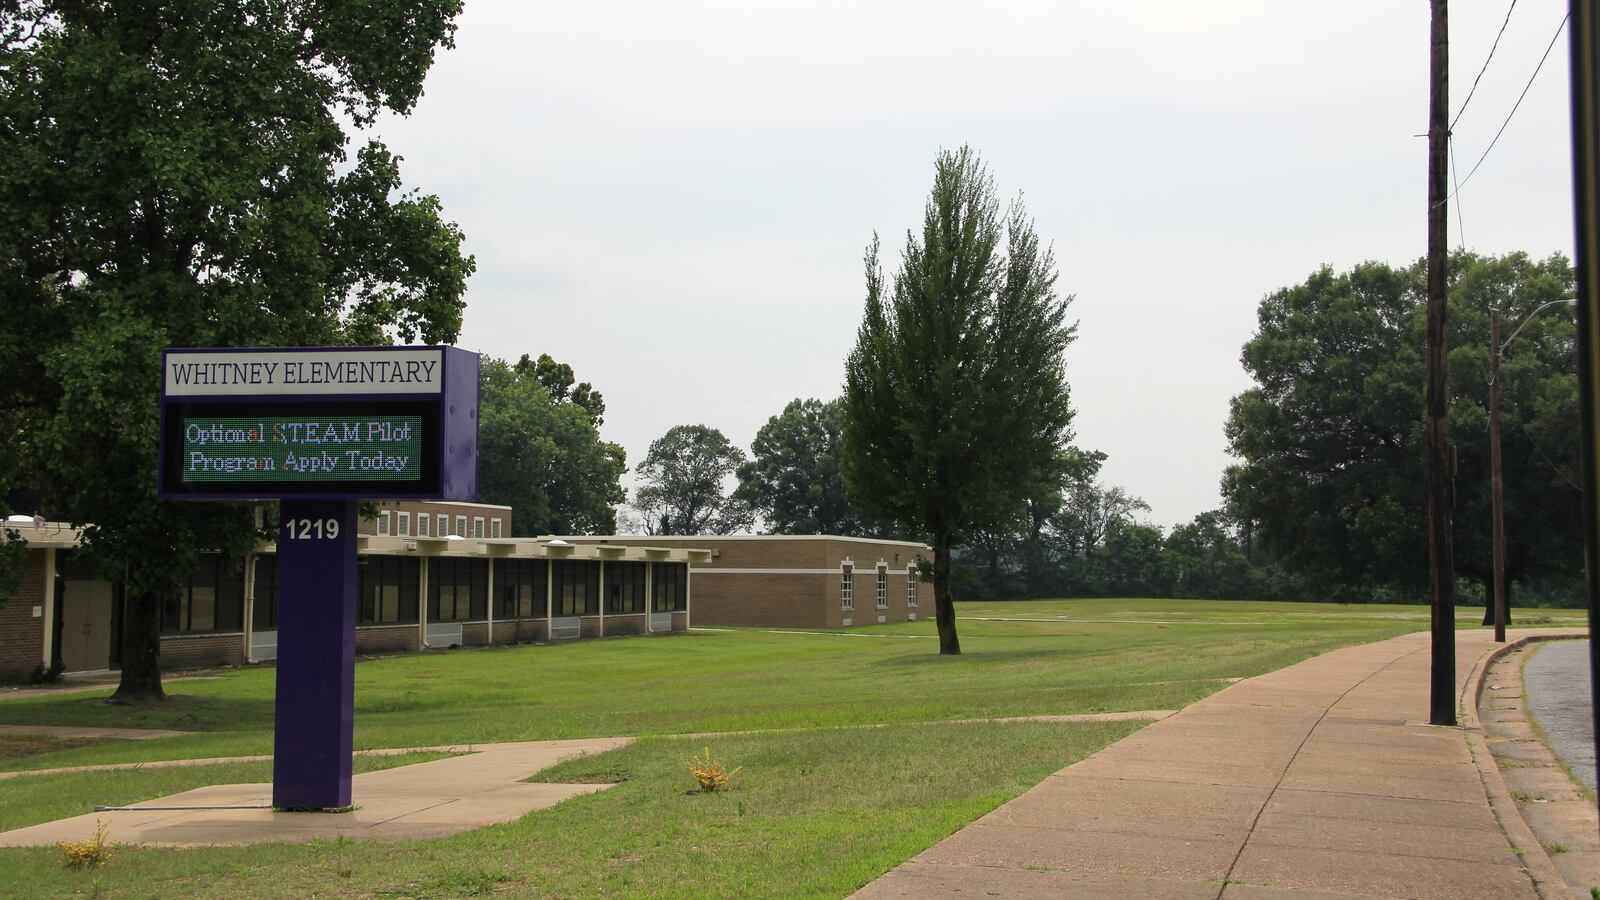 Whitney Achievement Elementary School, in the Memphis community of Frayser, is located adjacent to a field (behind the tree line) that is the site of a proposed demolition landfill.